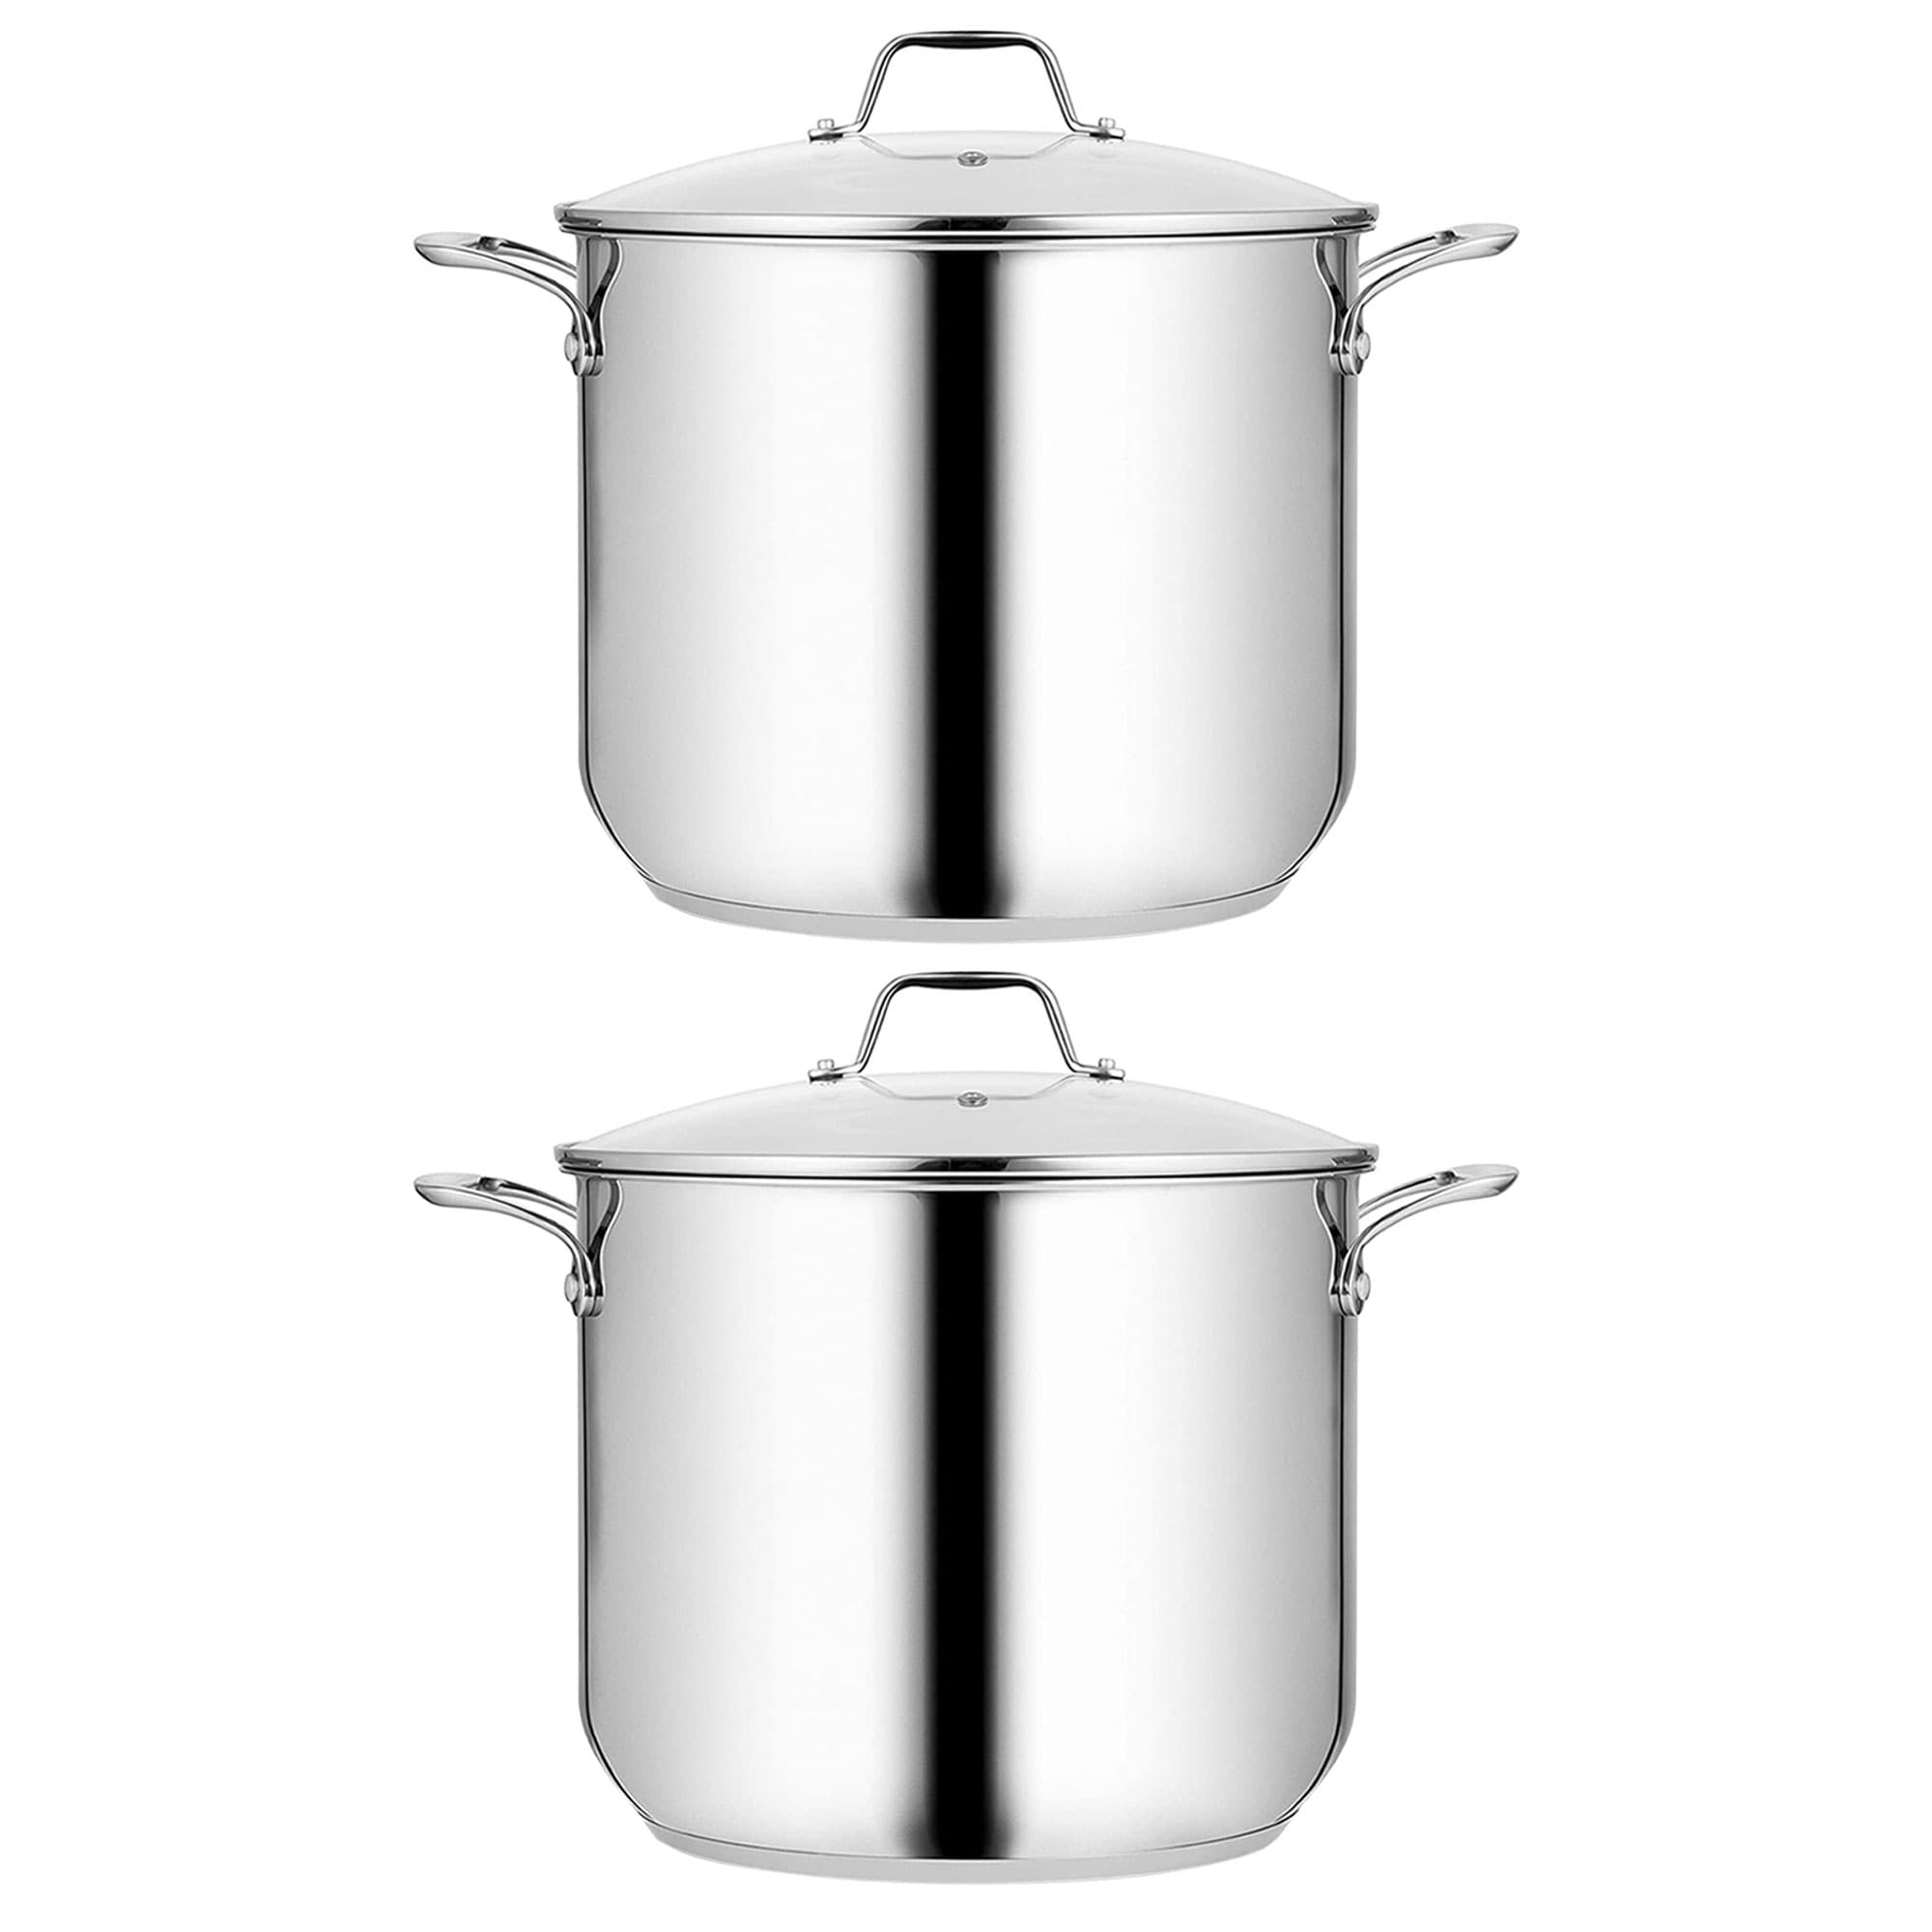 https://ak1.ostkcdn.com/images/products/is/images/direct/8a9eda6631c72ac76c48806f19a17472444ebc2e/NutriChef-Heavy-Duty-19-Quart-Stainless-Steel-Soup-Stock-Pot-with-Lid-%282-Pack%29.jpg